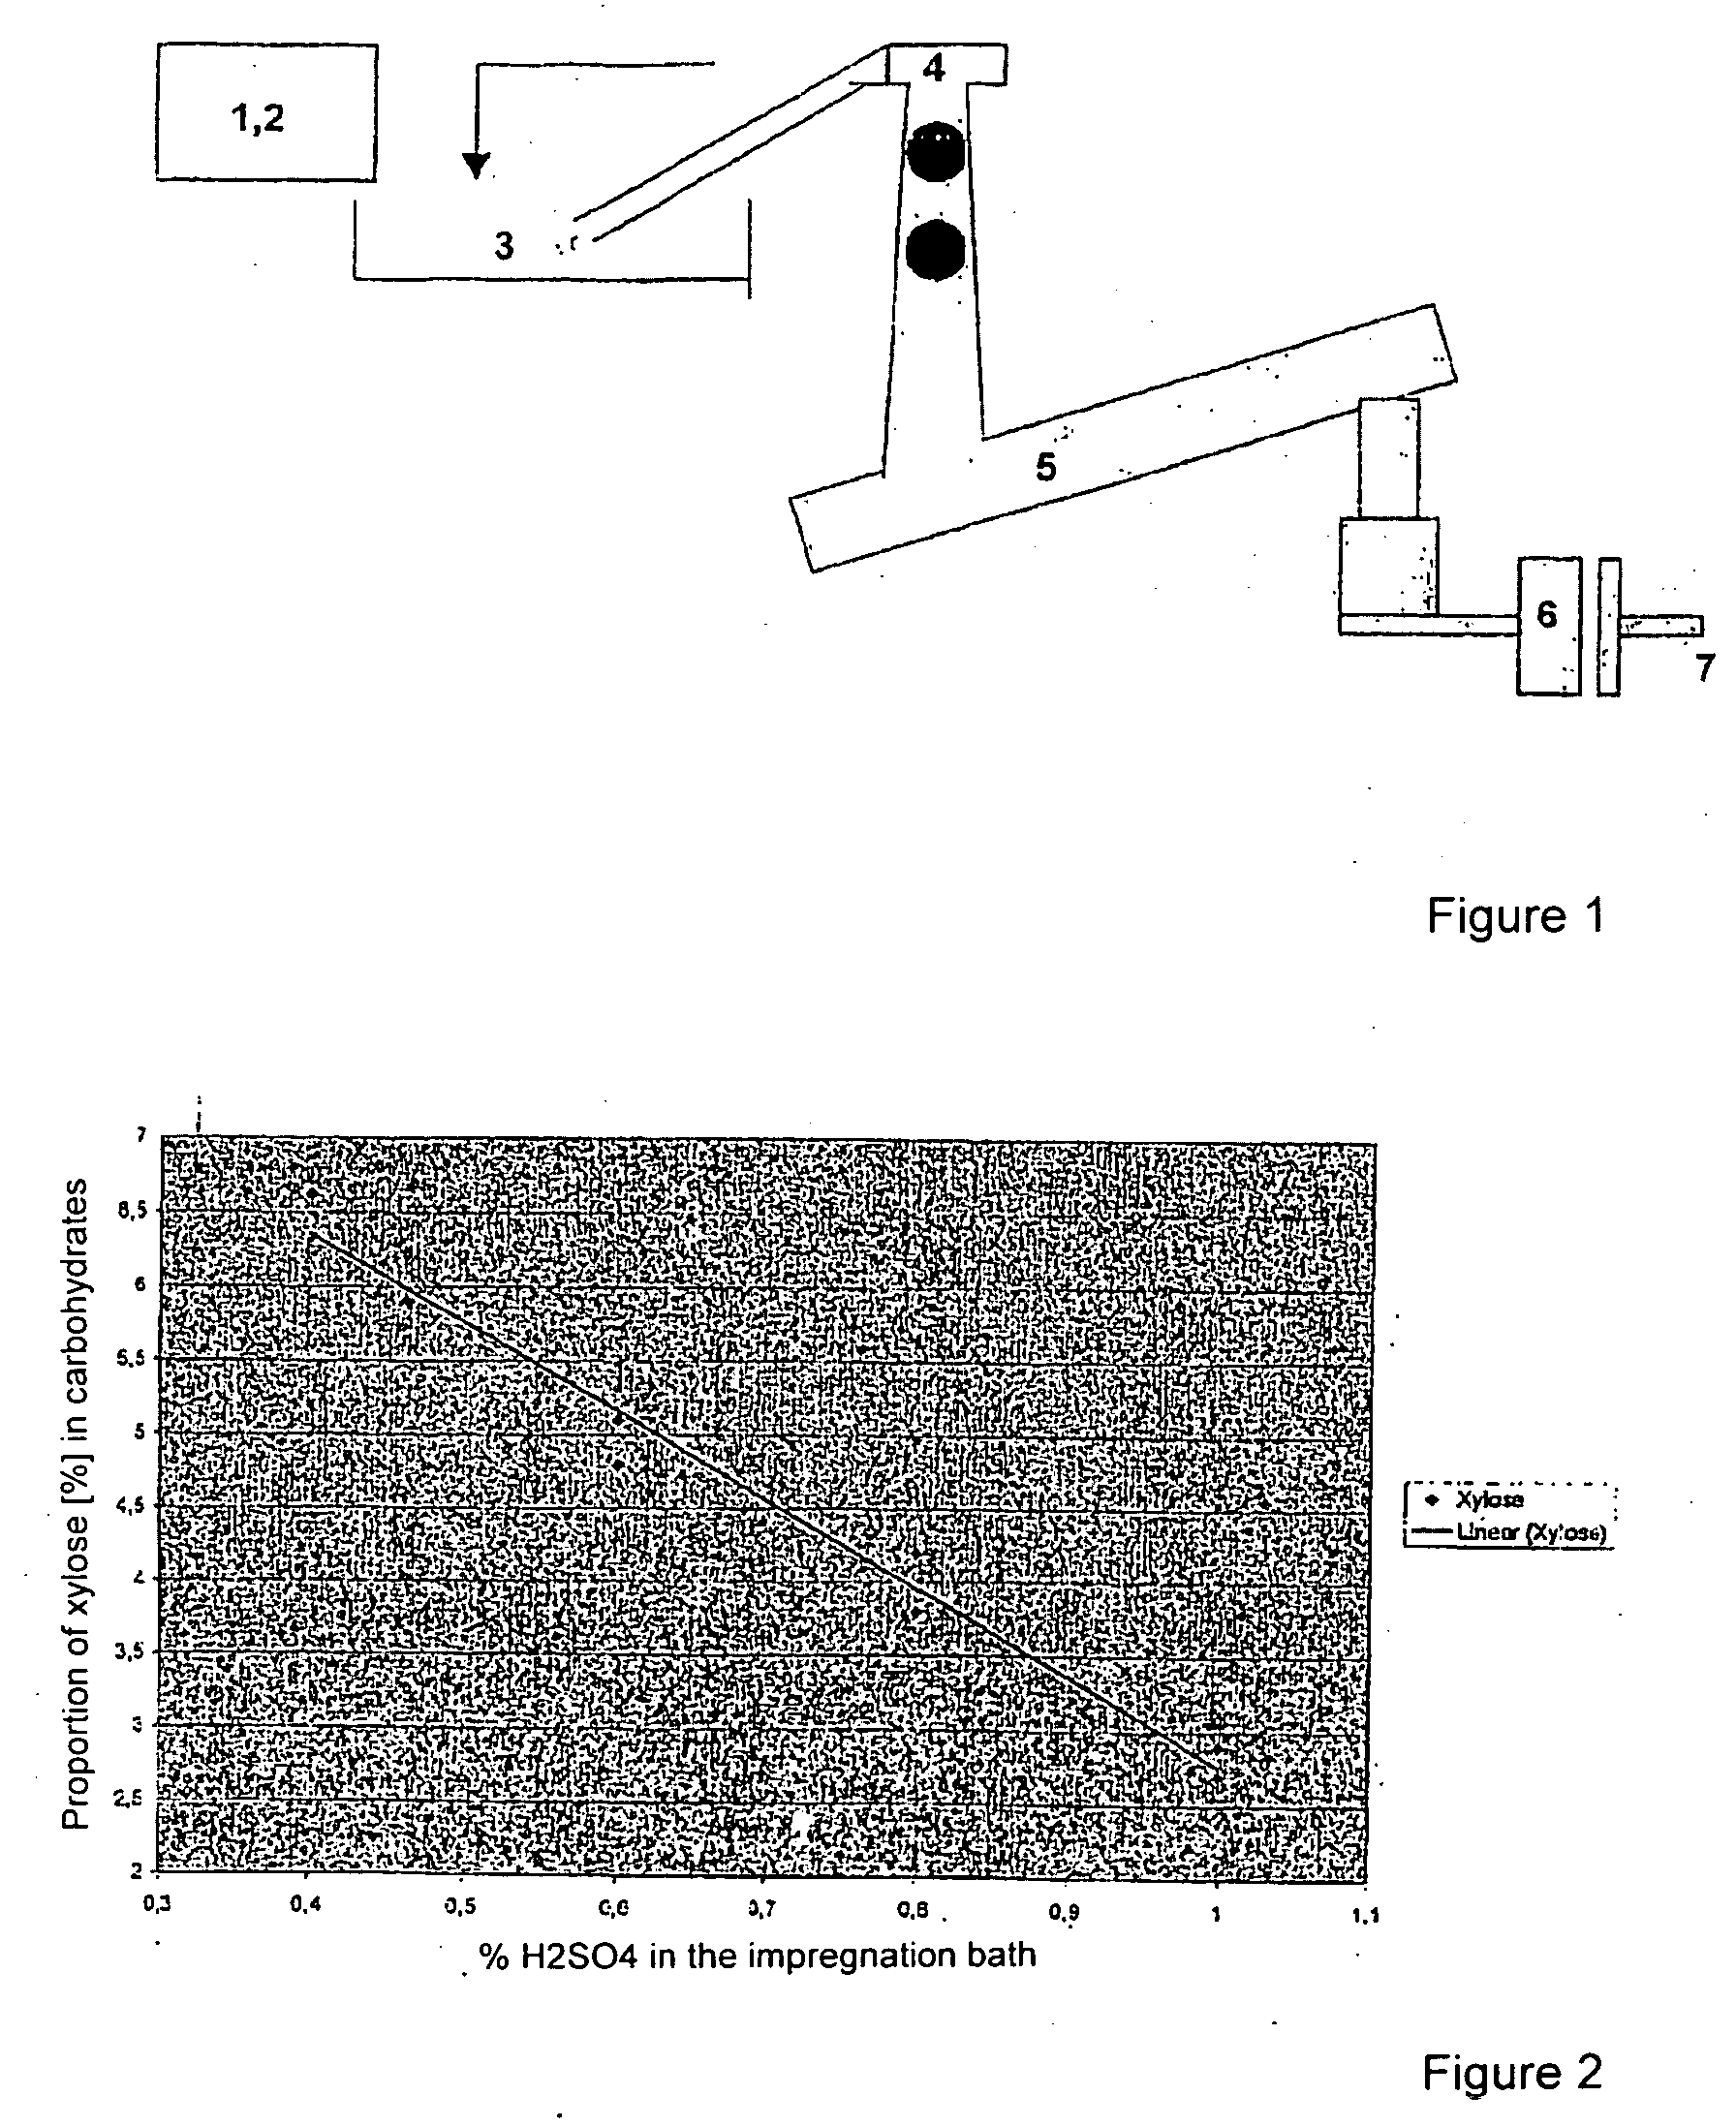 Method for separating xylose from lignocelluloses rich in xylan, in particular wood